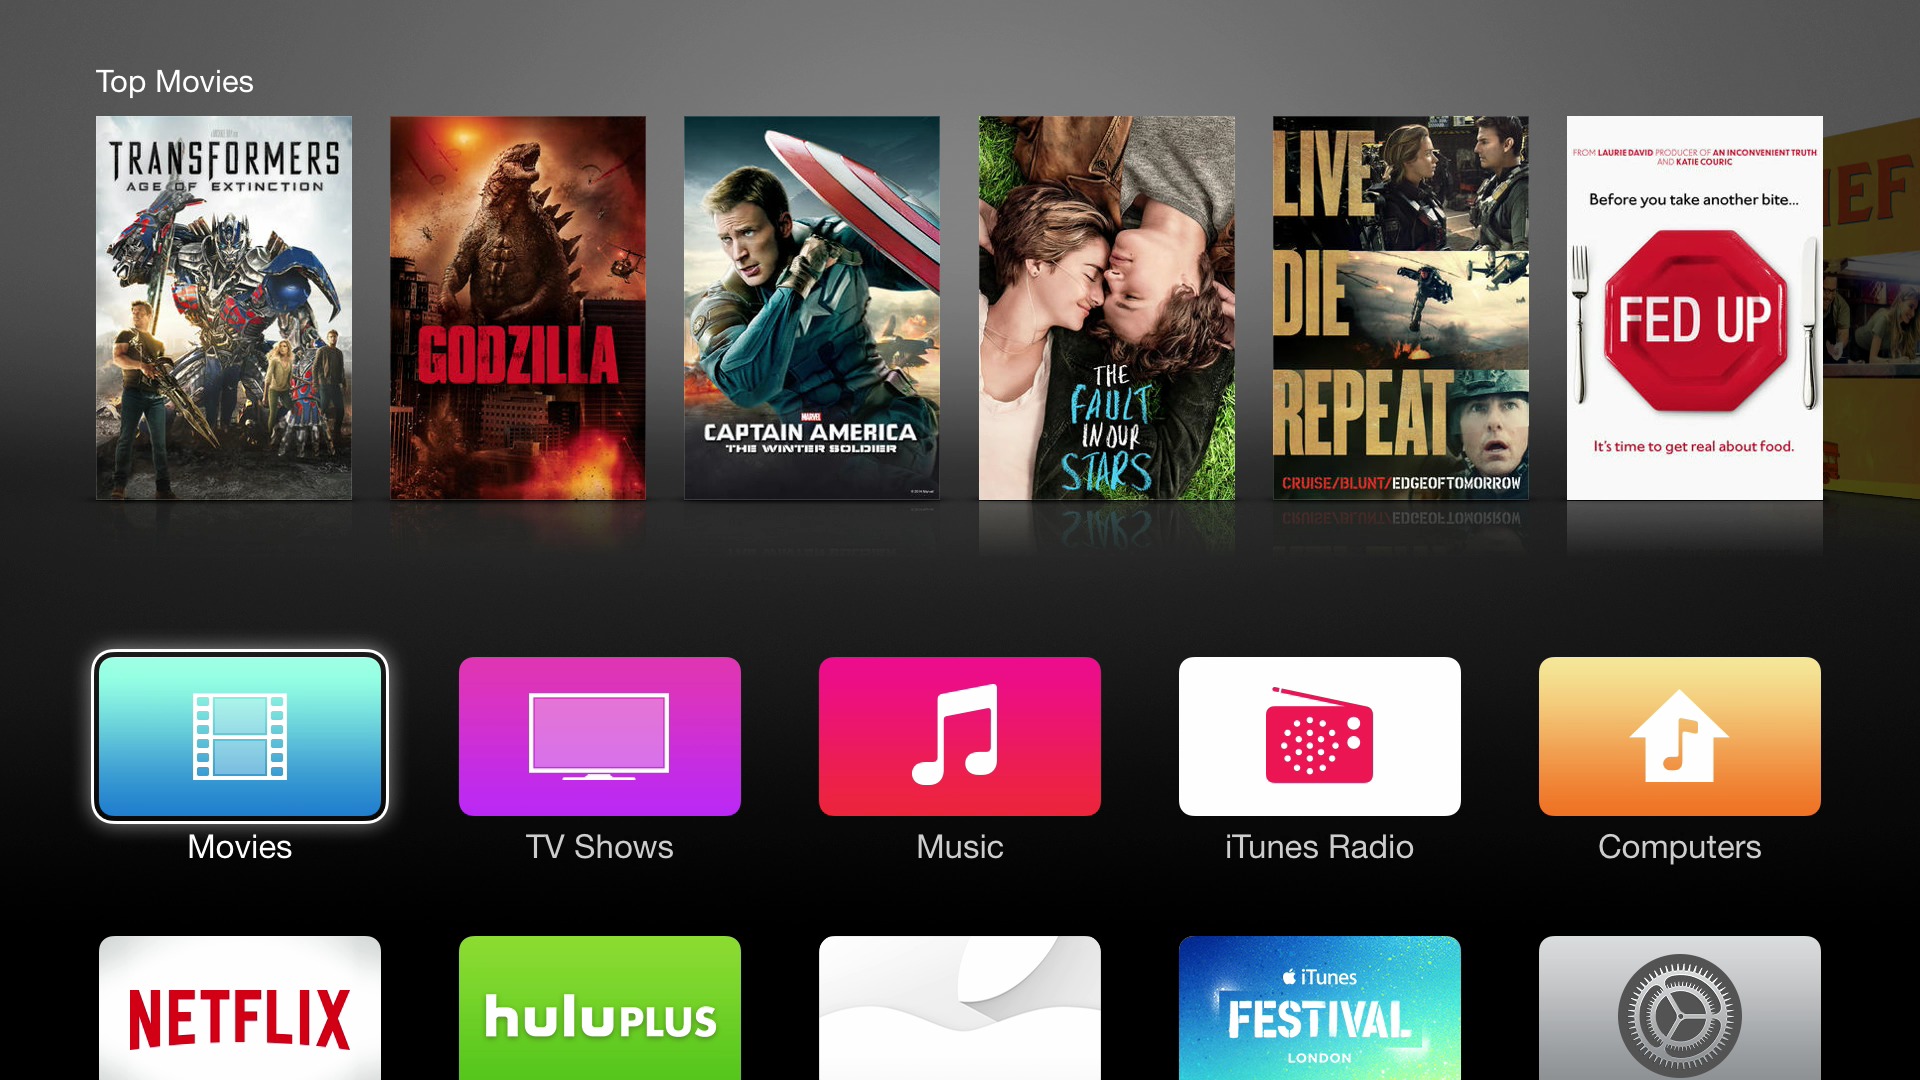 Apple TV Updated to 7.0, Includes Beats Music -